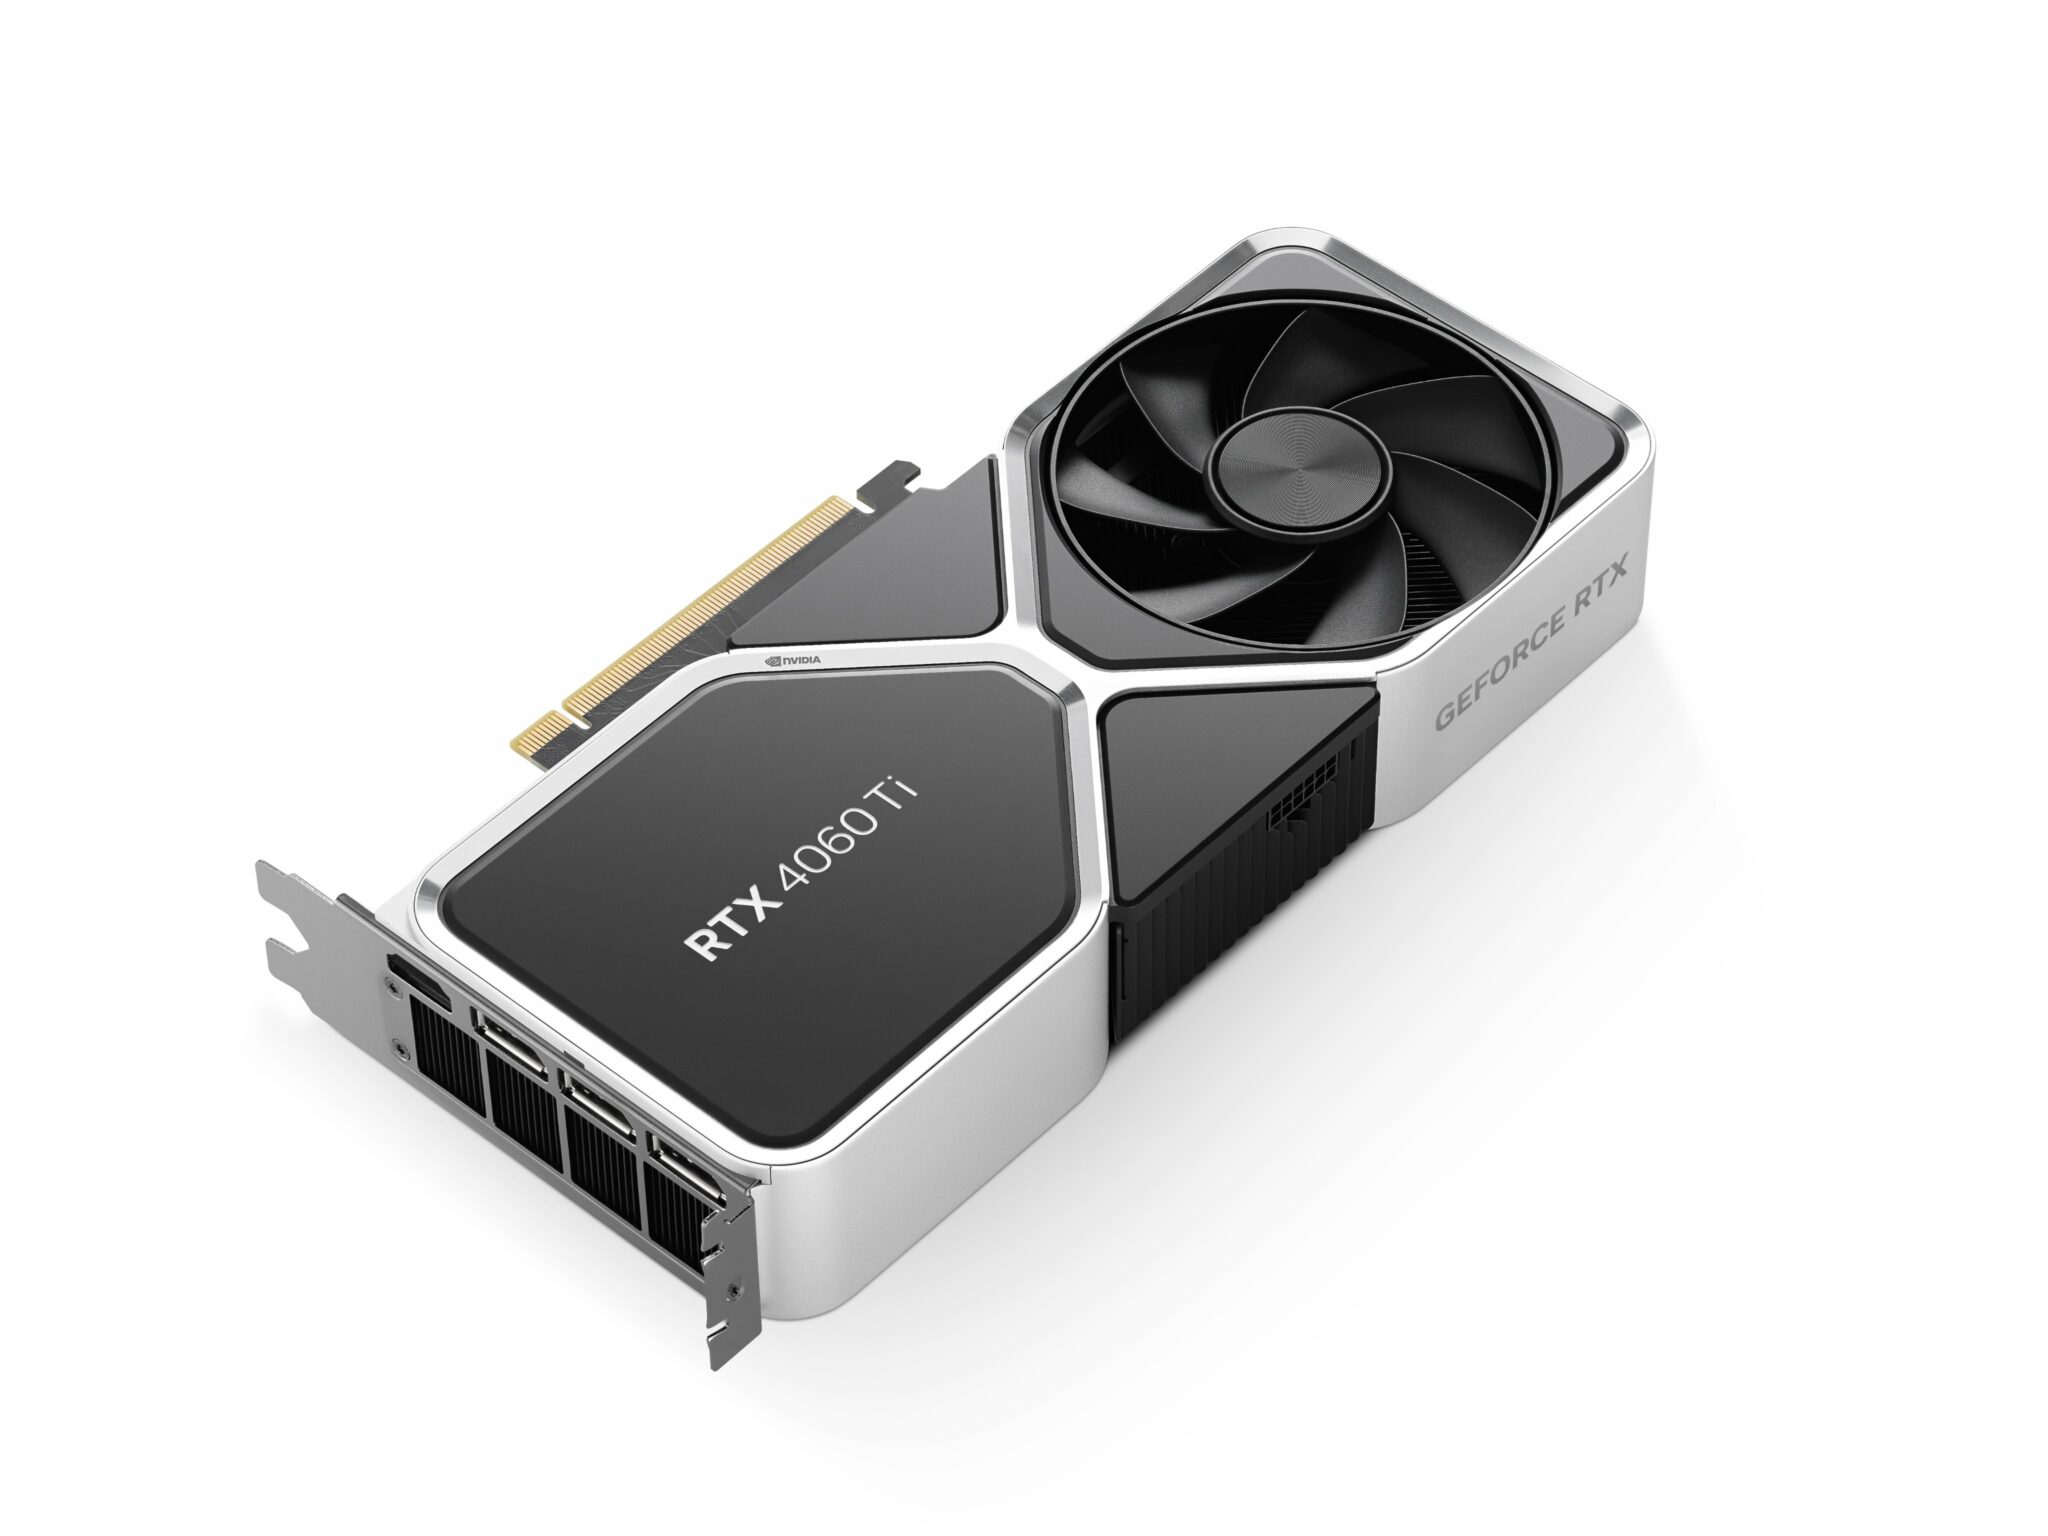 GeForce RTX 4060 could be 20% faster than the RTX 3060 with a bigger price  tag and lower power consumption -  News